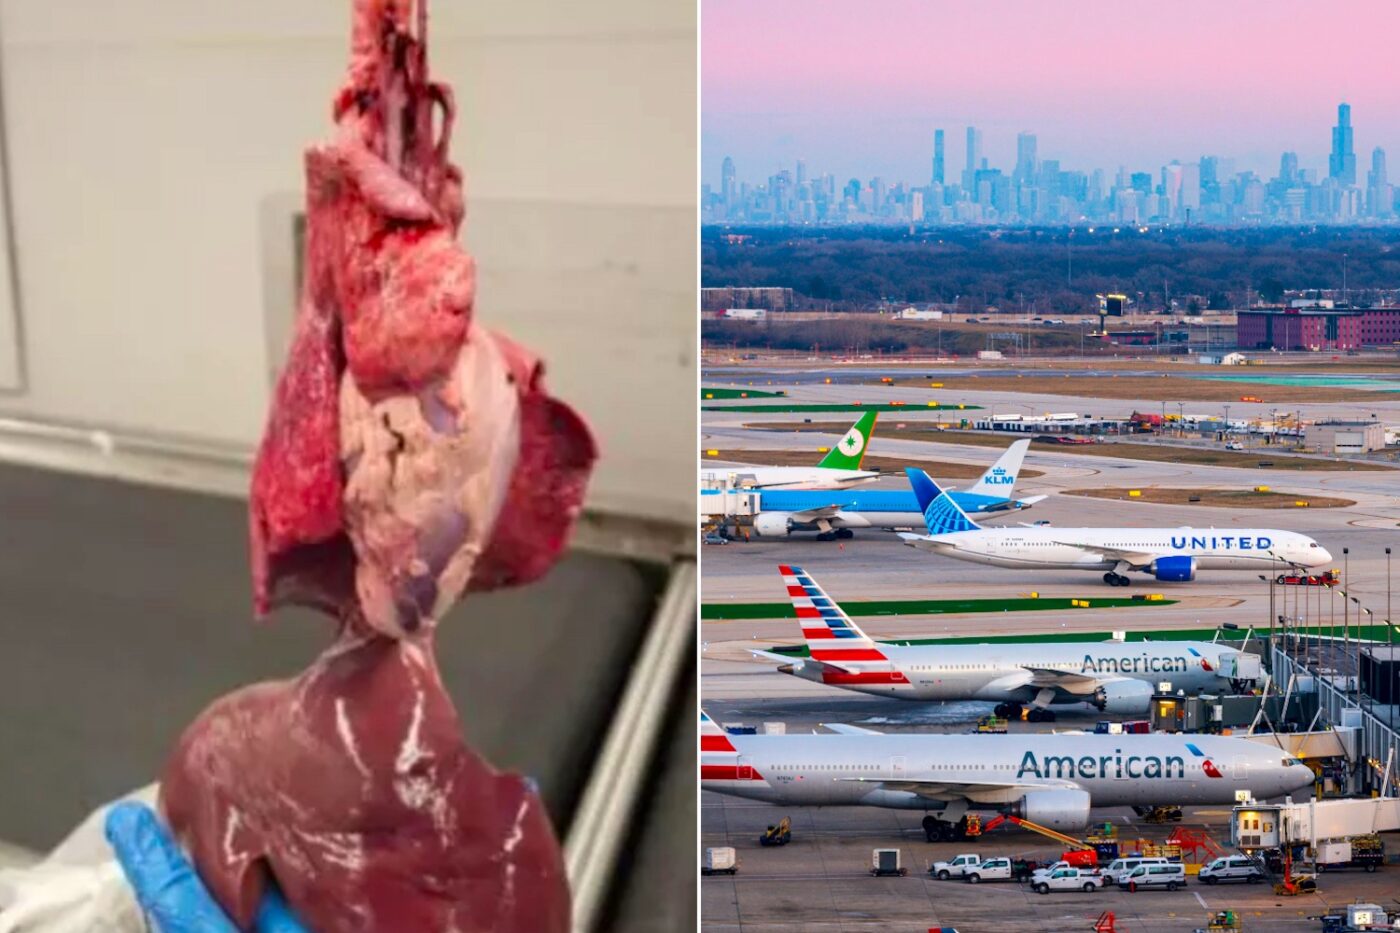 Couple Caught Smuggling Disemboweled Goat In Luggage At Chicago Airport